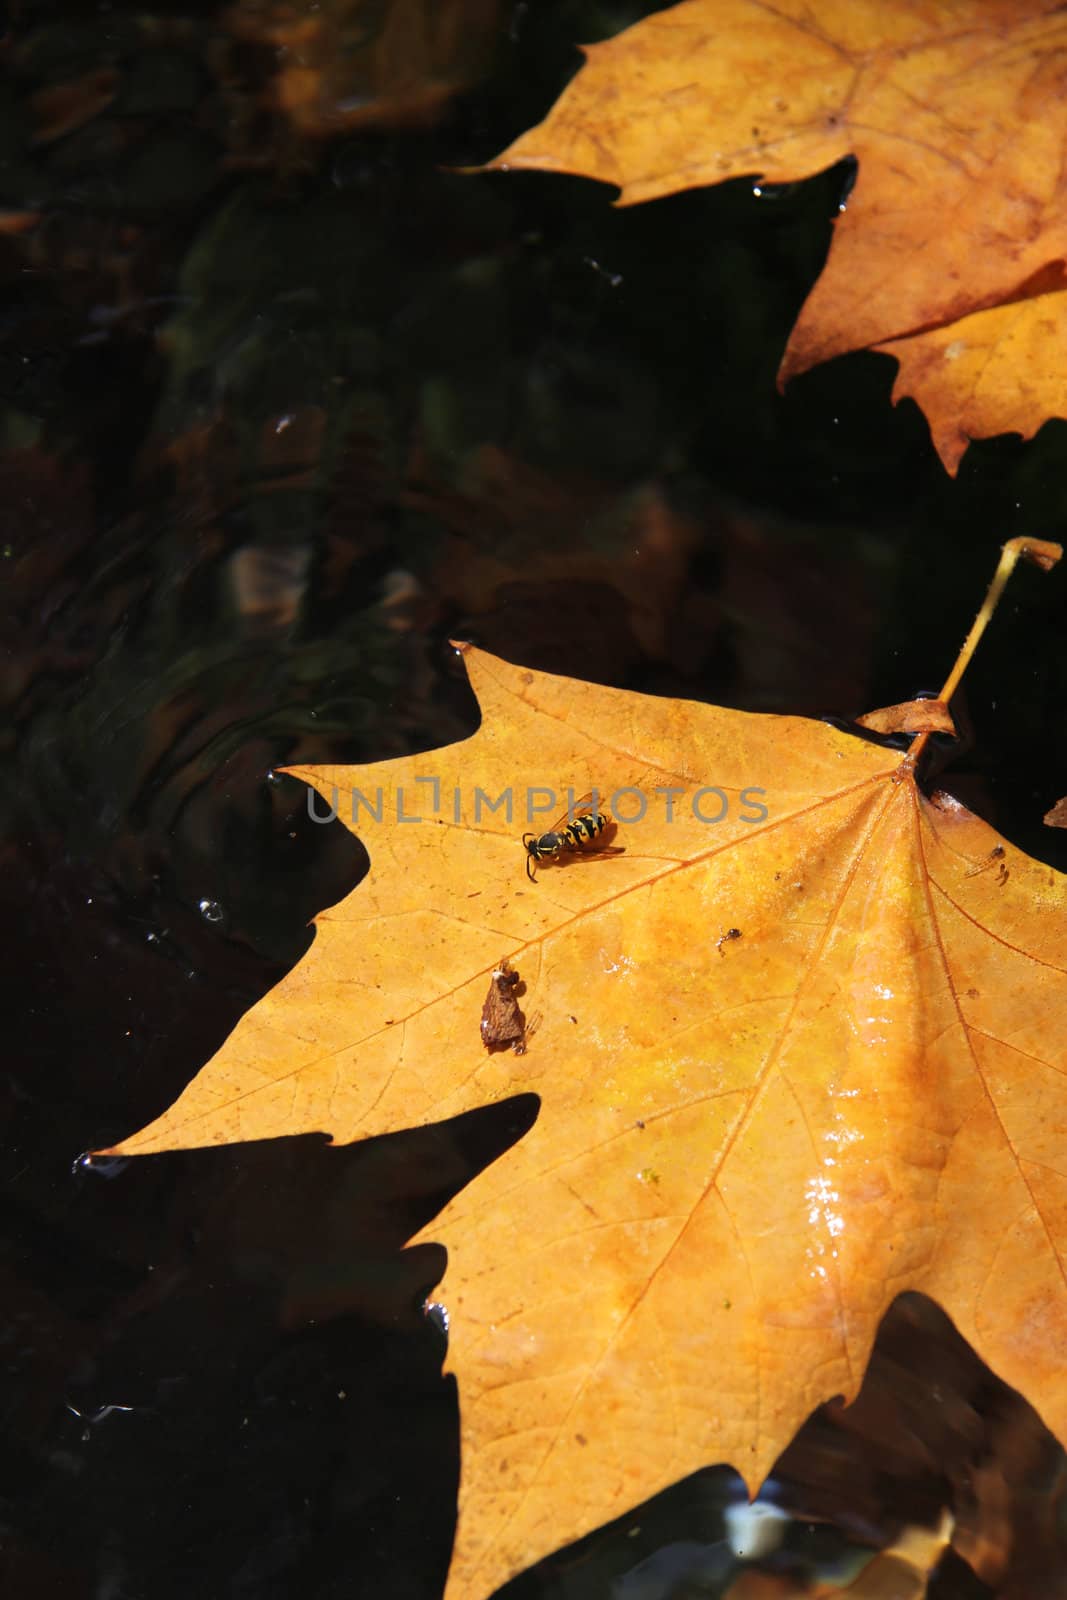 Floating autumn leaves in a fountain